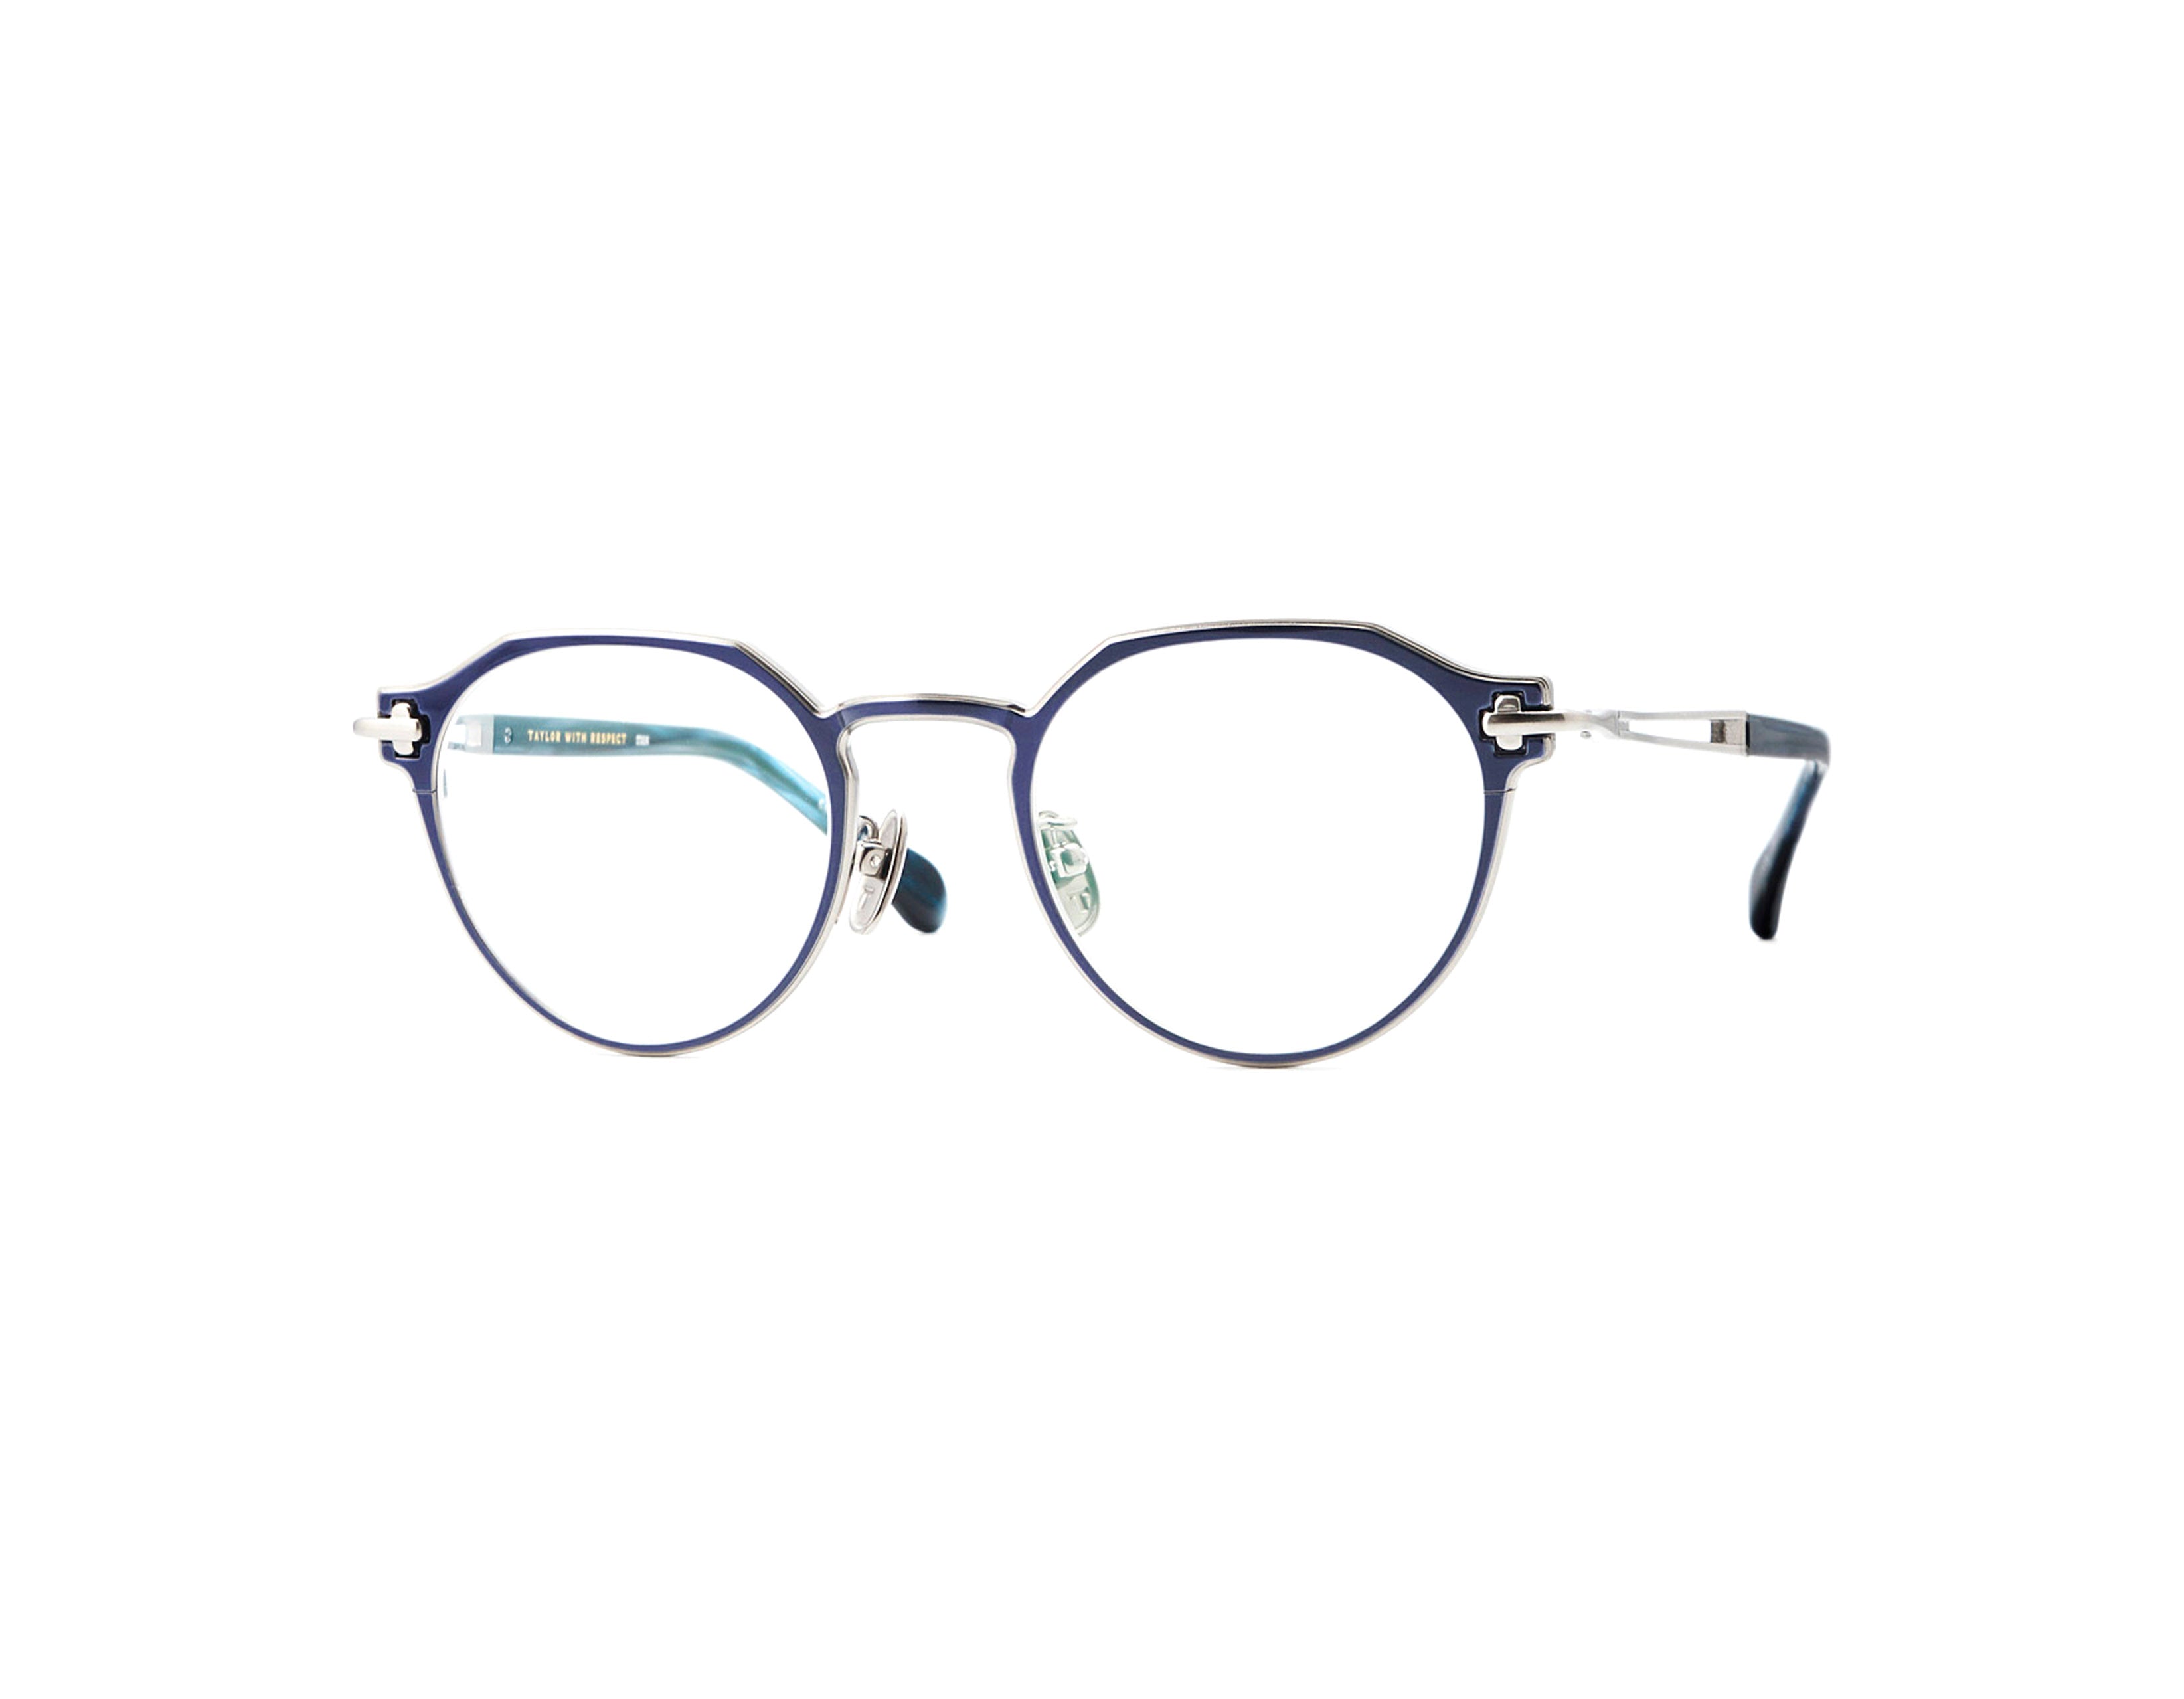 Taylor with Respect - Relief C3 – BLACKZMITH Optical